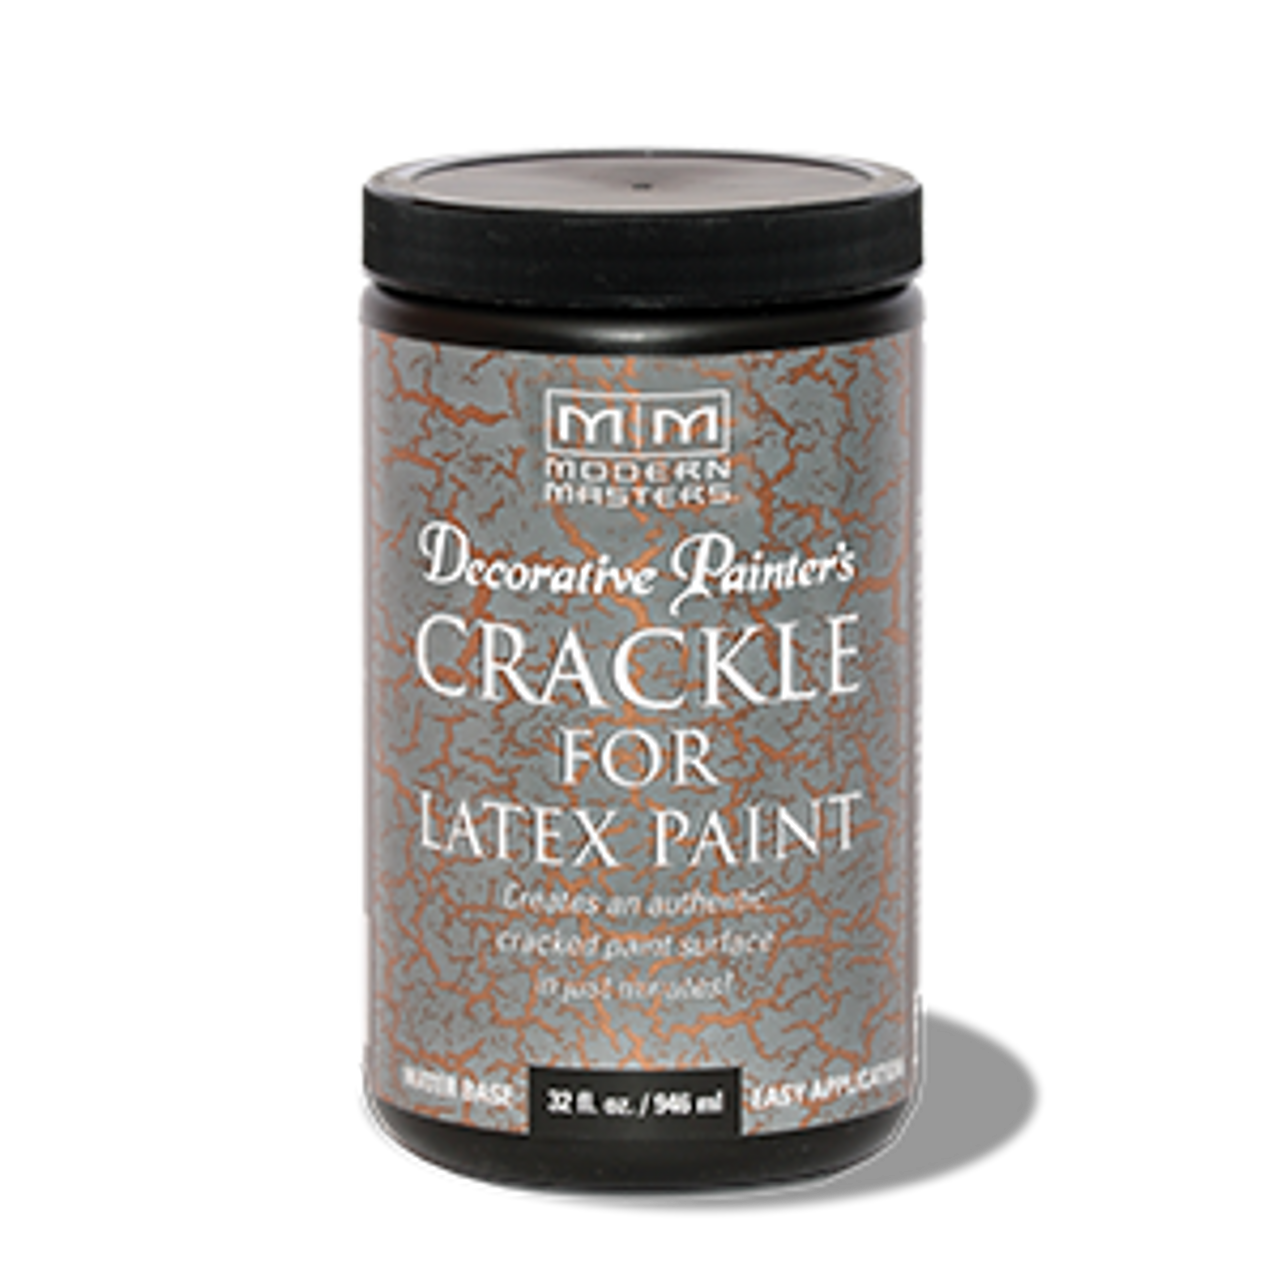 DP601
CRACKLE FOR LATEX